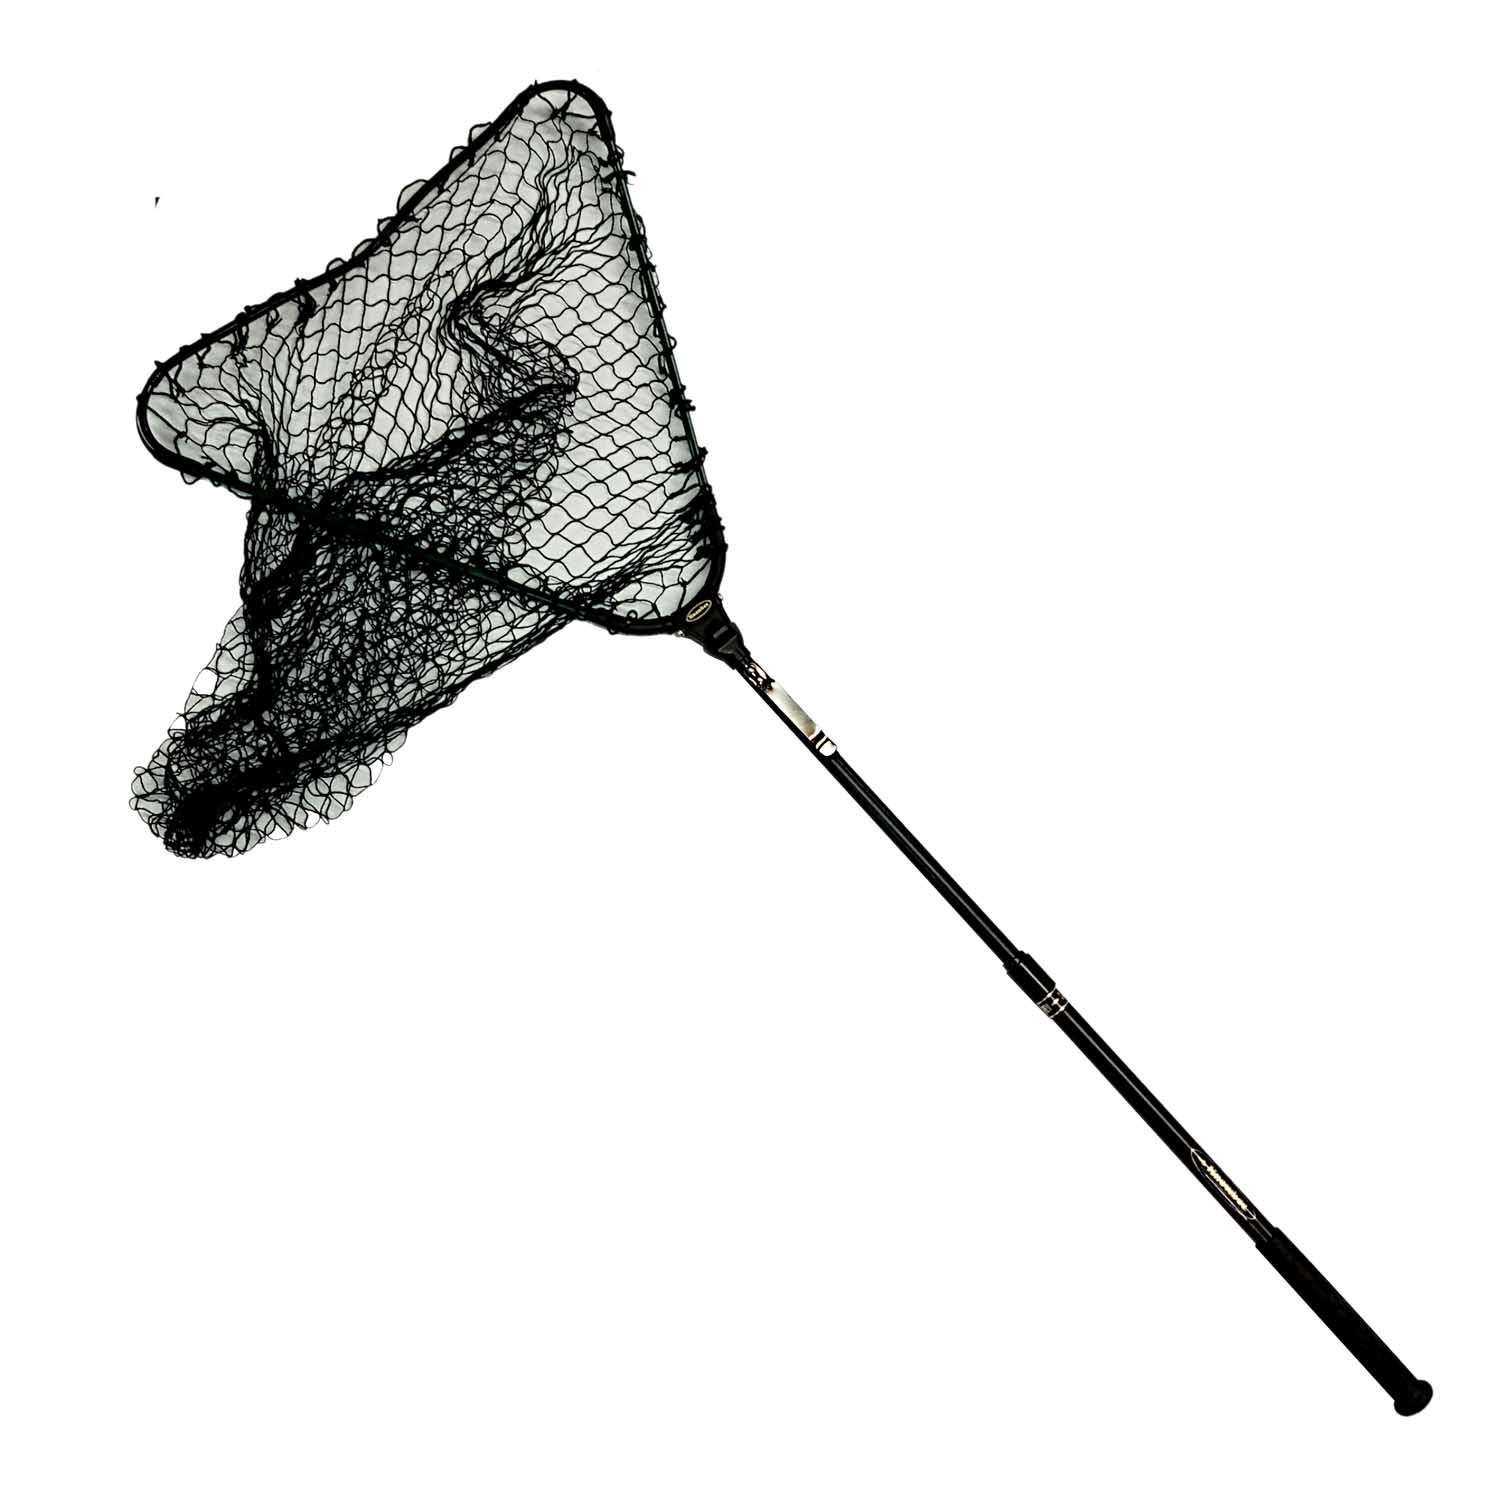 https://www.showspace.co.za/showspaceimages/kingfisher/25-01-315%20&%2025-01-320.Snowbee_Telescopic_Landing_Net_Opened_cmrcws.jpg